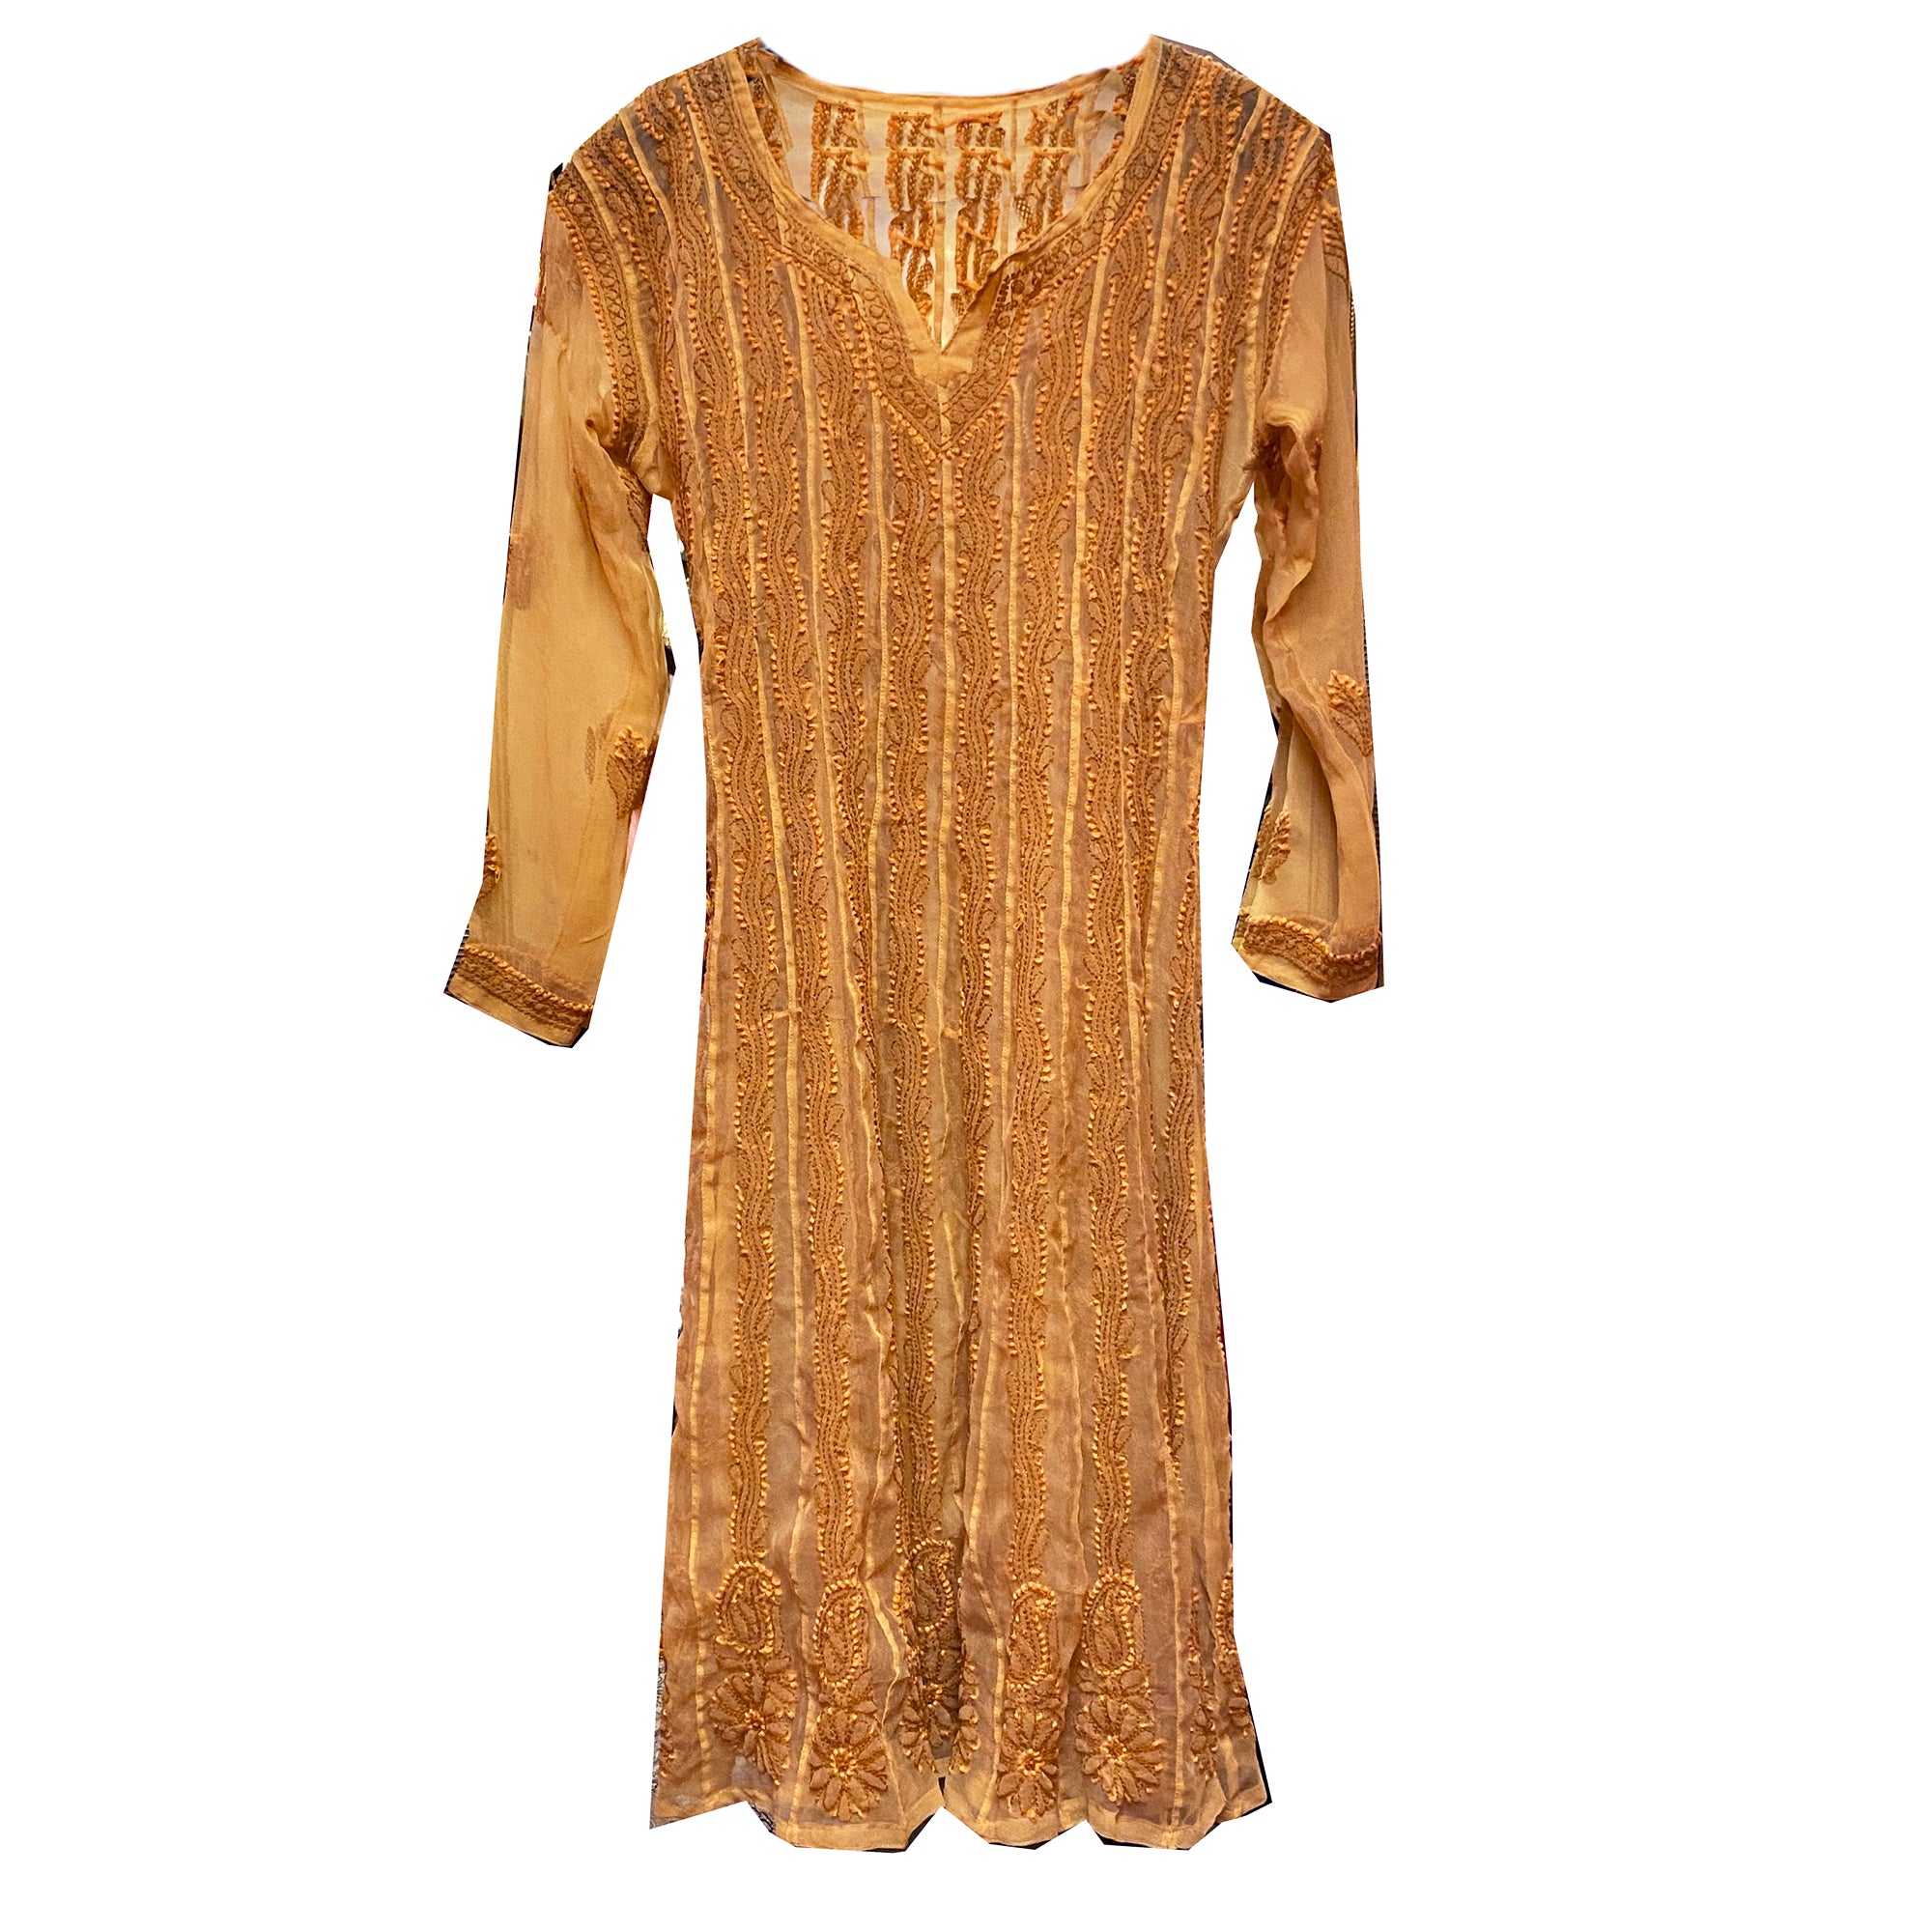 Gold Lucknowi Dress - Vintage India NYC